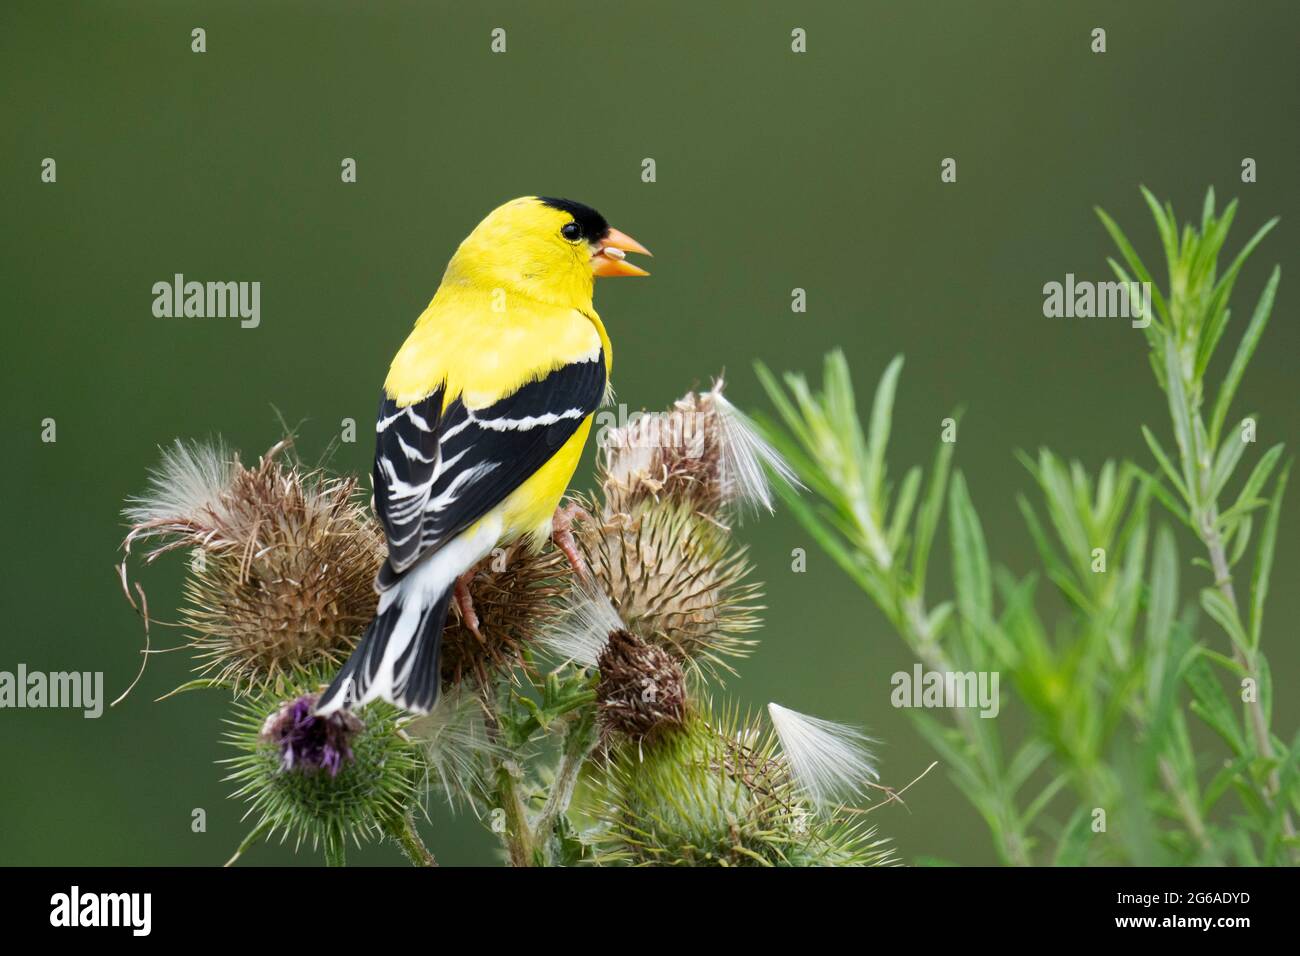 American Goldfinch with Thistle seed in Beak  (Spinus tristis), perched on Thistle (Cirsium arvense) Stock Photo